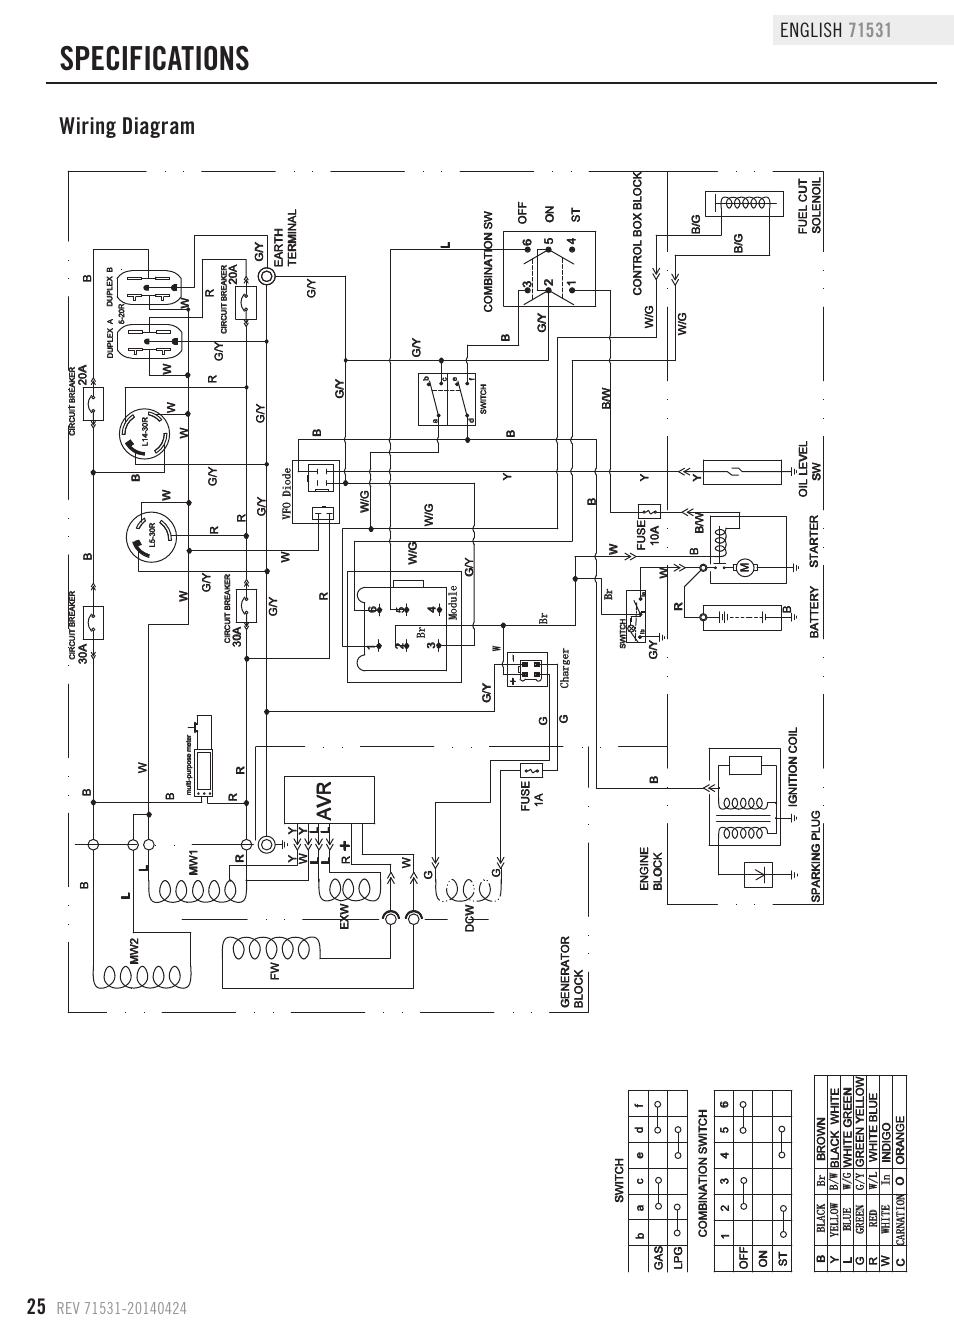 Specifications  Wiring Diagram